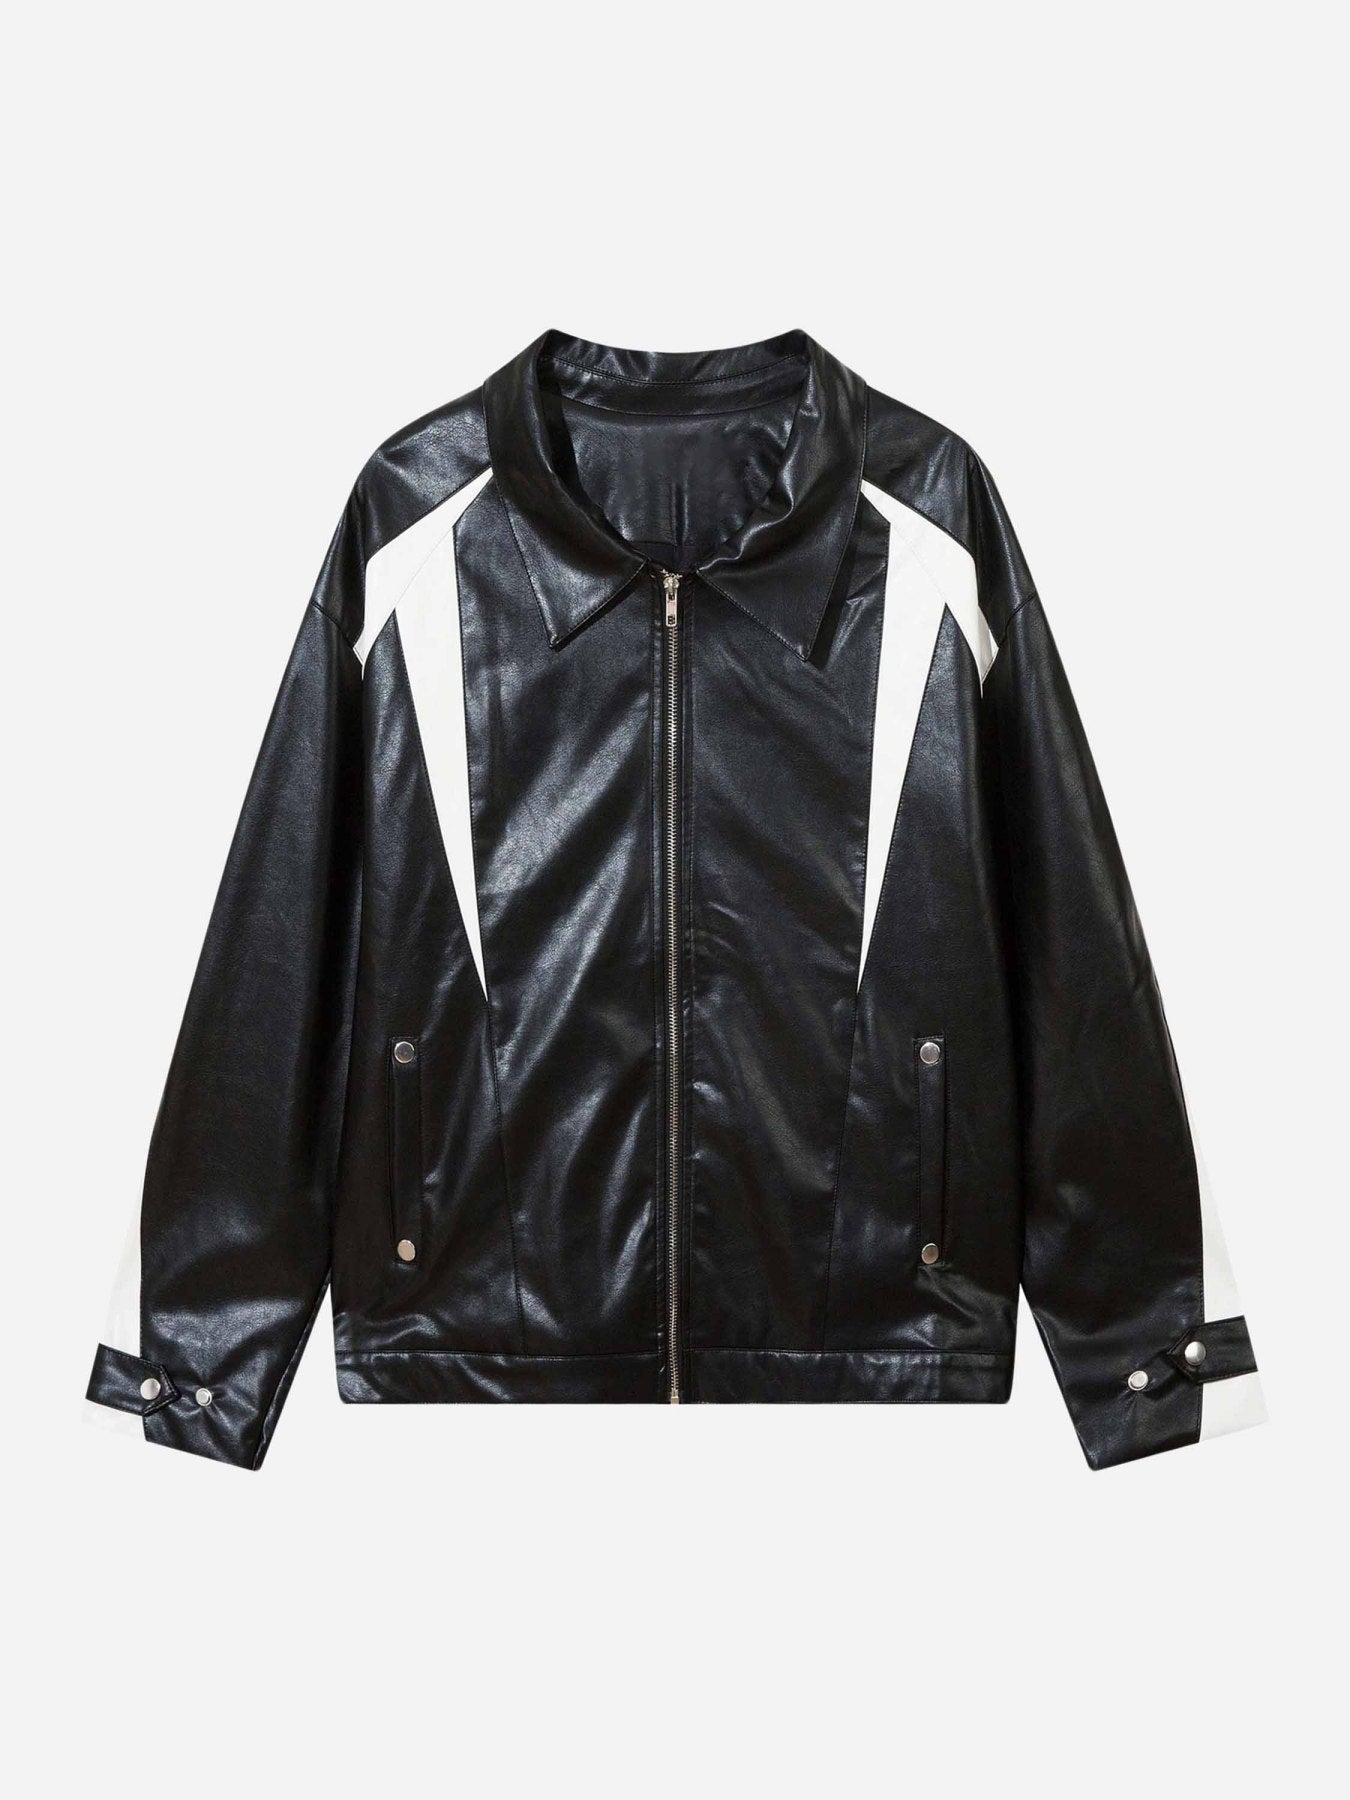 The Supermade Colorblocked Lapel Leather Jacket